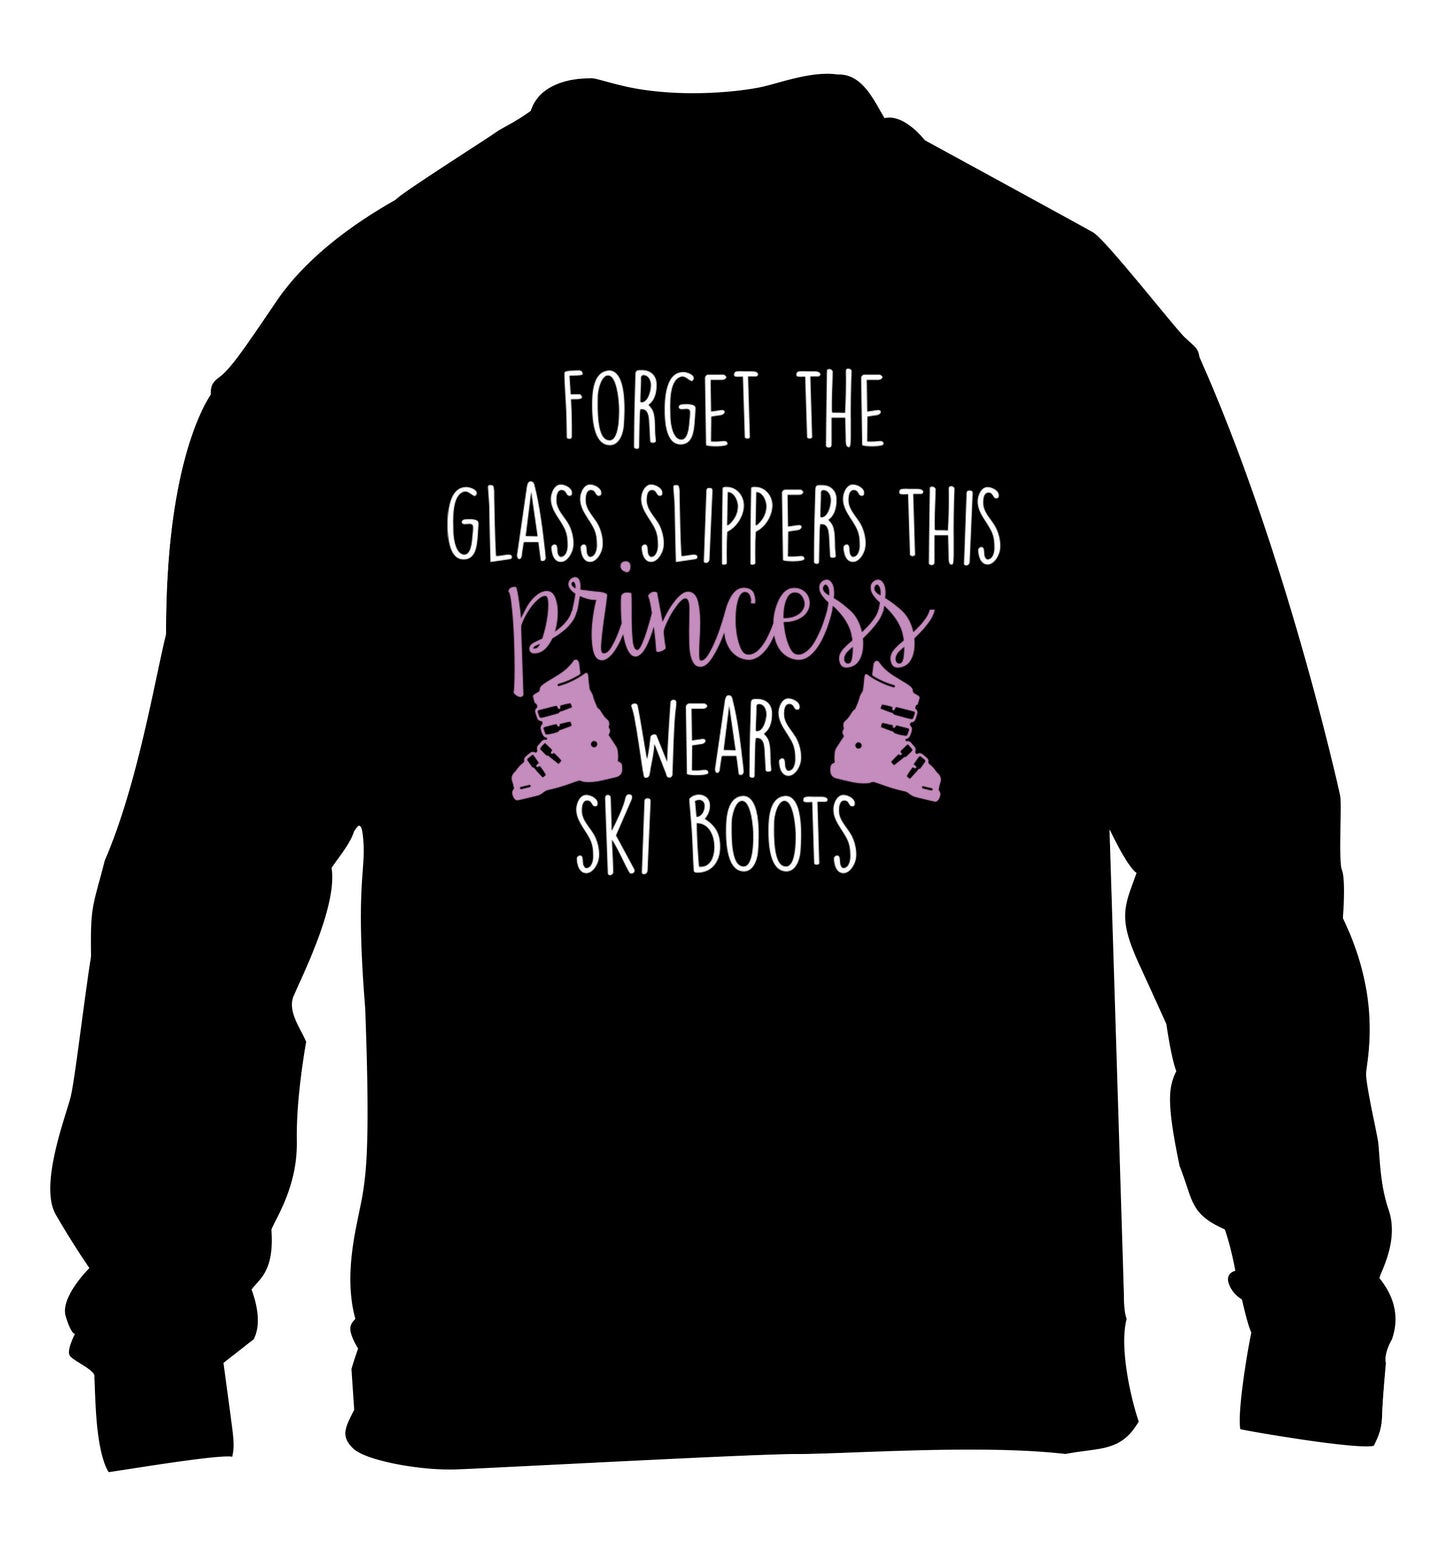 Forget the glass slippers this princess wears ski boots children's black sweater 12-14 Years